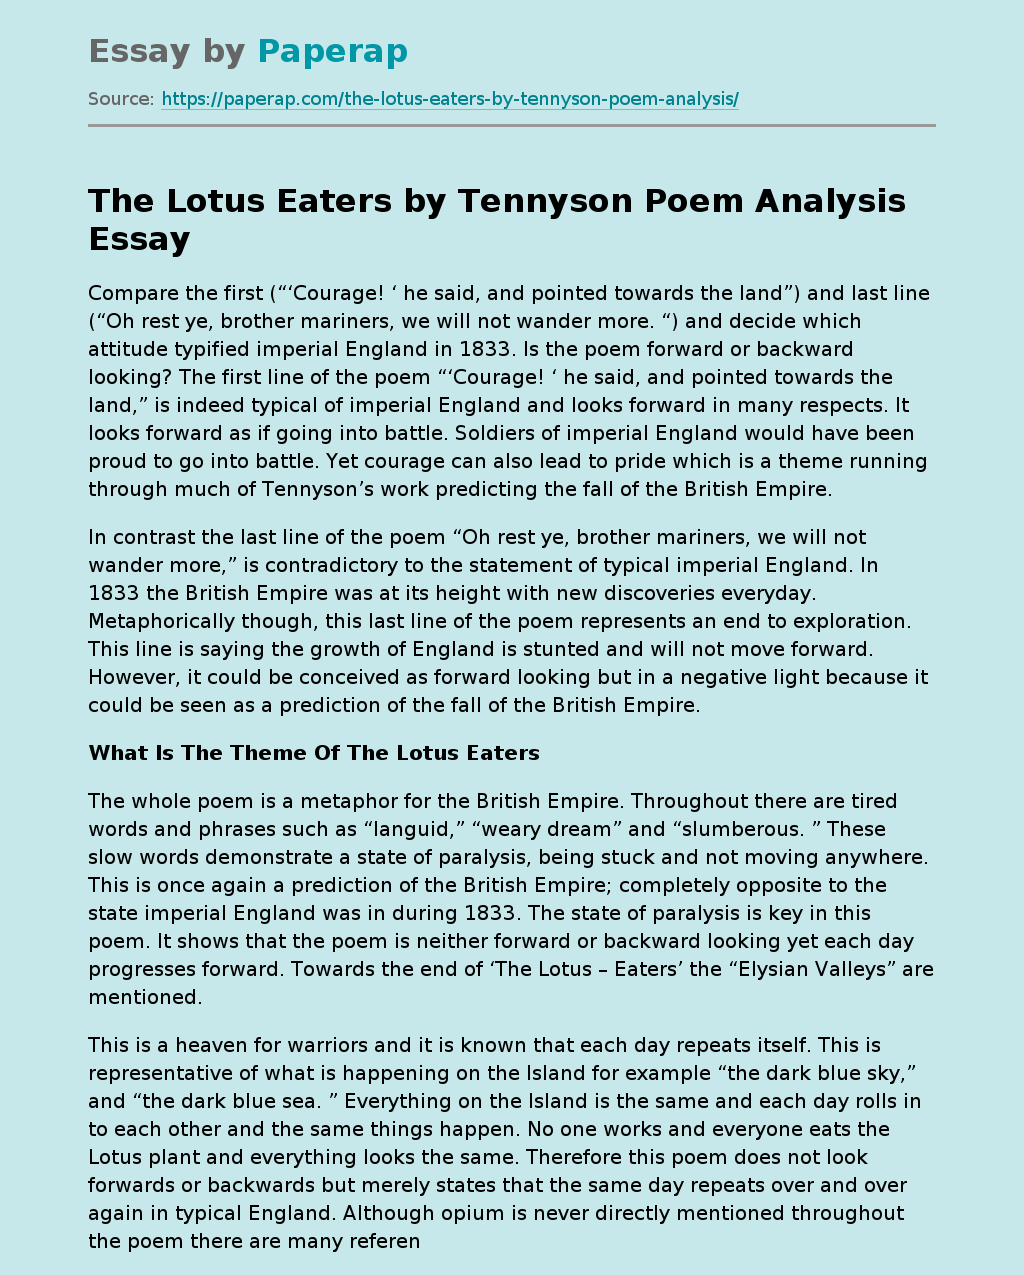 alfred lord tennyson the lotos eaters